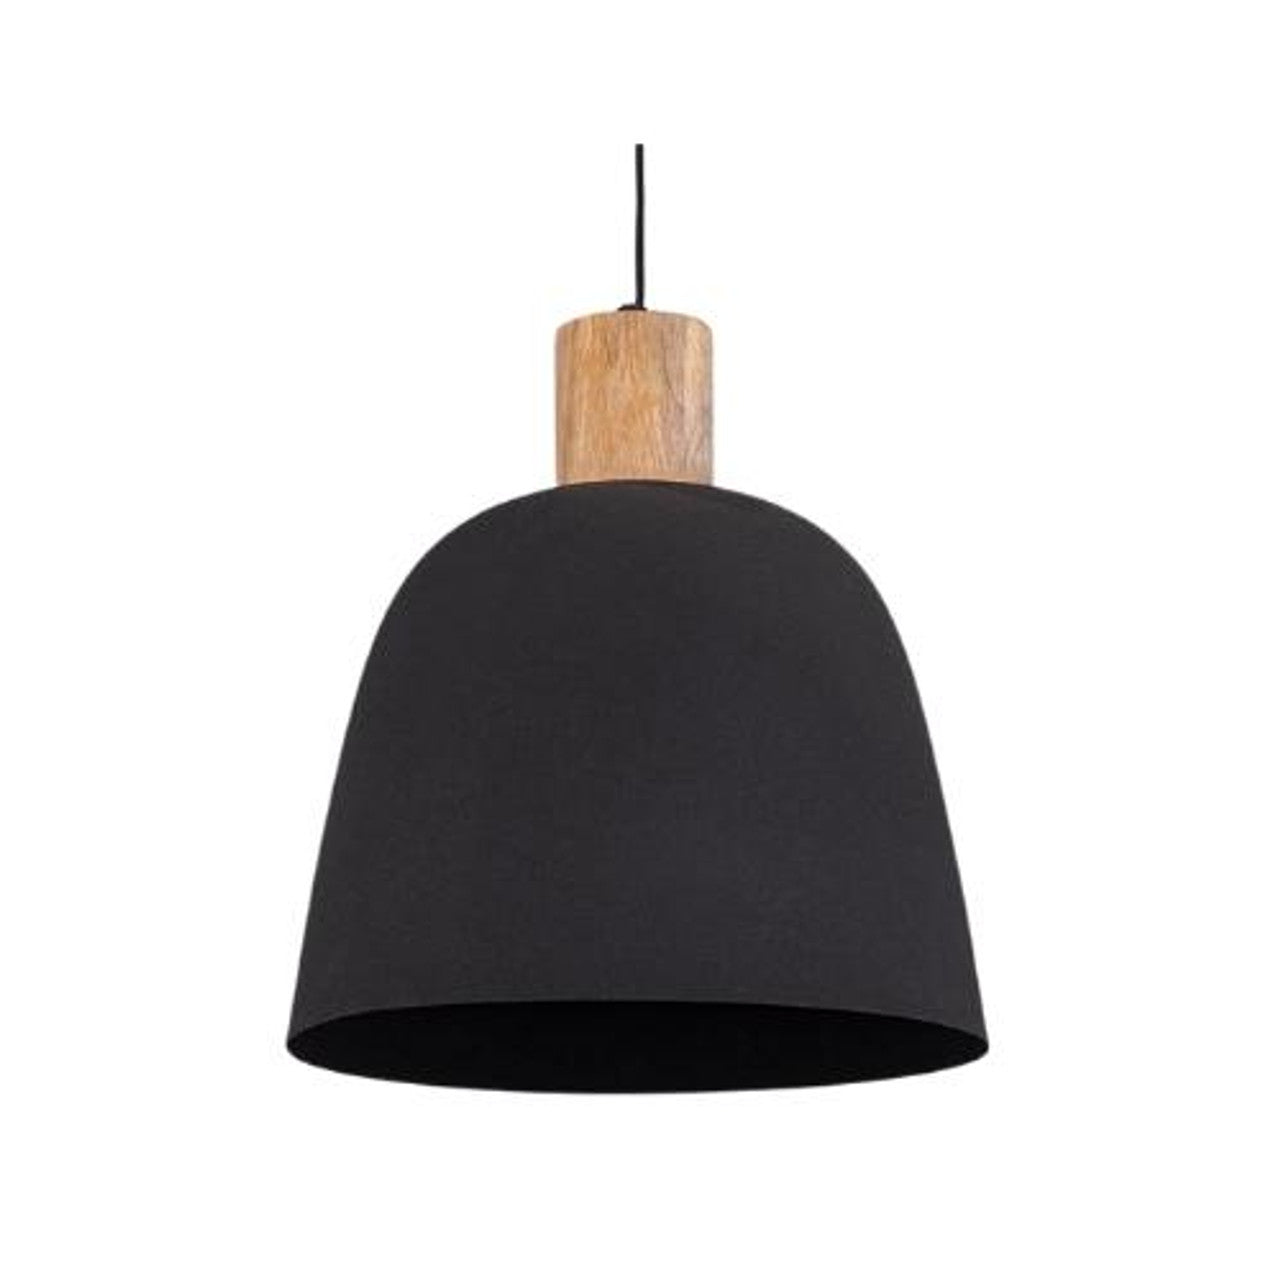 Flagstaff Black & Wood Pendant Light (Launch Special) - Future Light - LED Lights South Africa